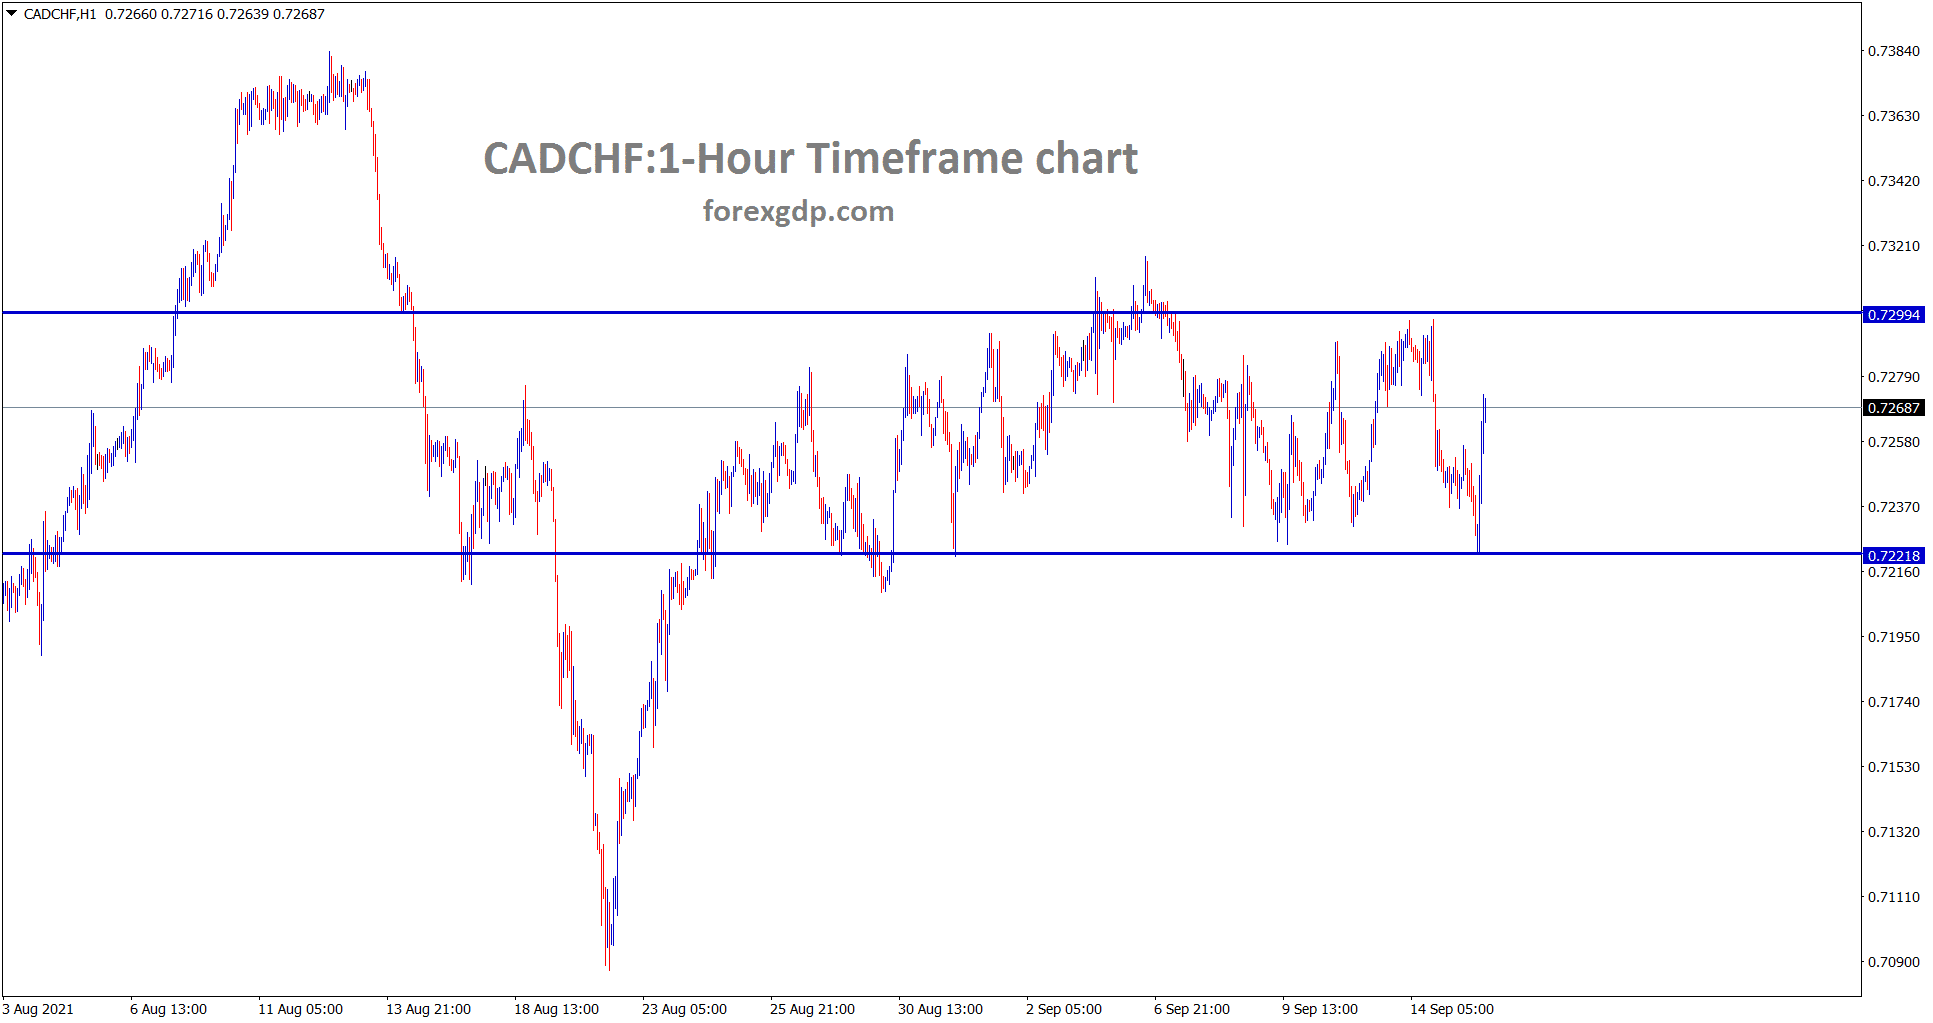 CADCHF is ranging between the support resistance area